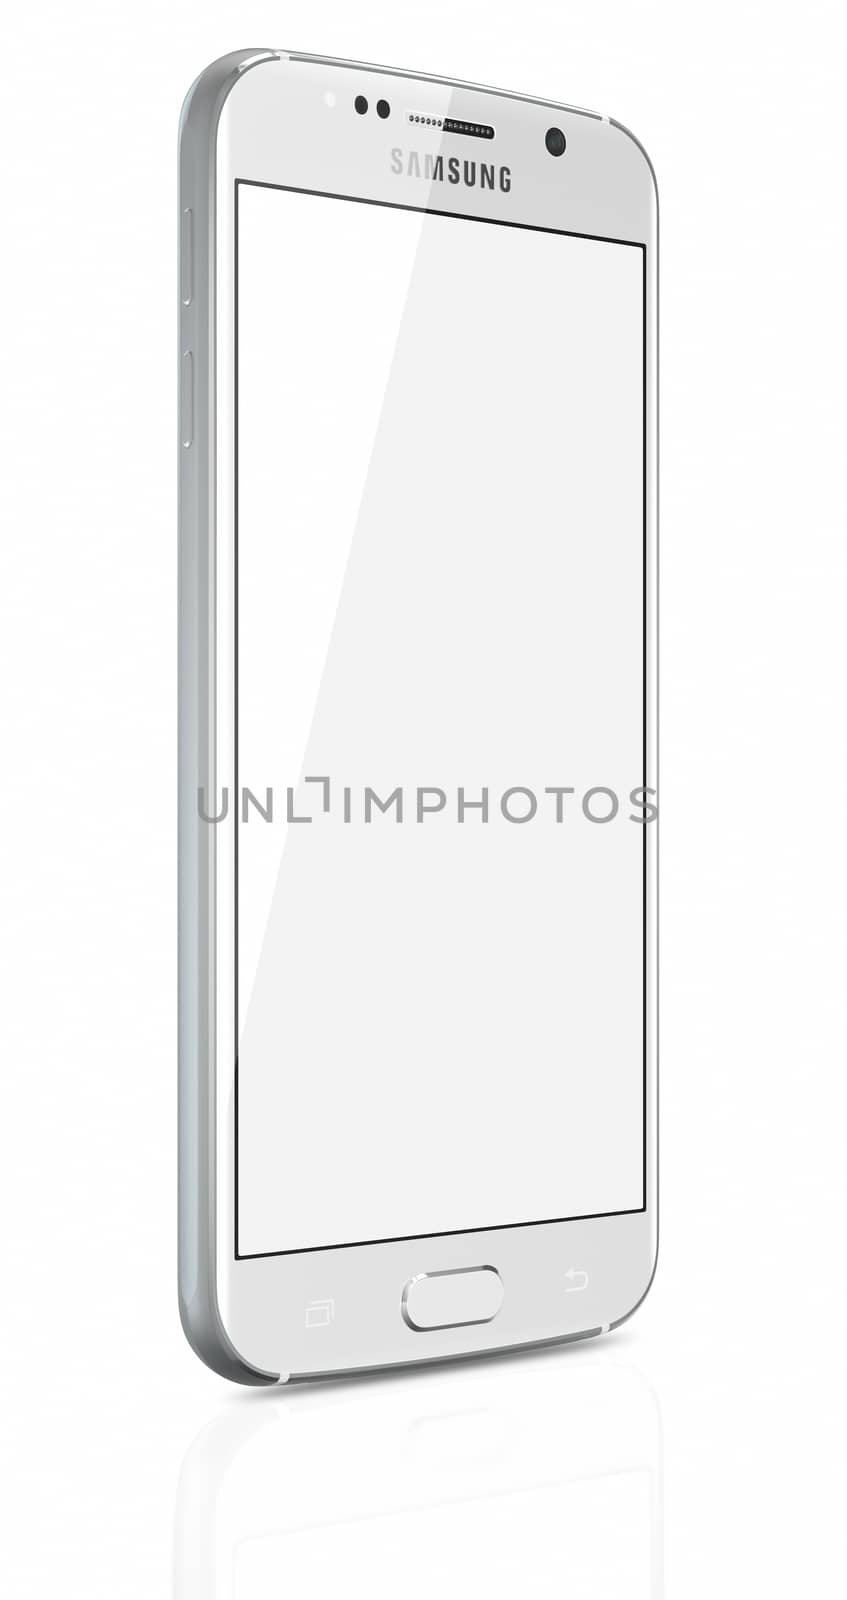 Galati, Romania - April 27, 2015: White Pearl Samsung Galaxy S6 with blank screen on white background. The telephone is supported with 5.1" touch screen display and 1440 x 2560 pixels resolution. The Samsung Galaxy S6 was launched at a press event in Barcelona on March 1 2015.